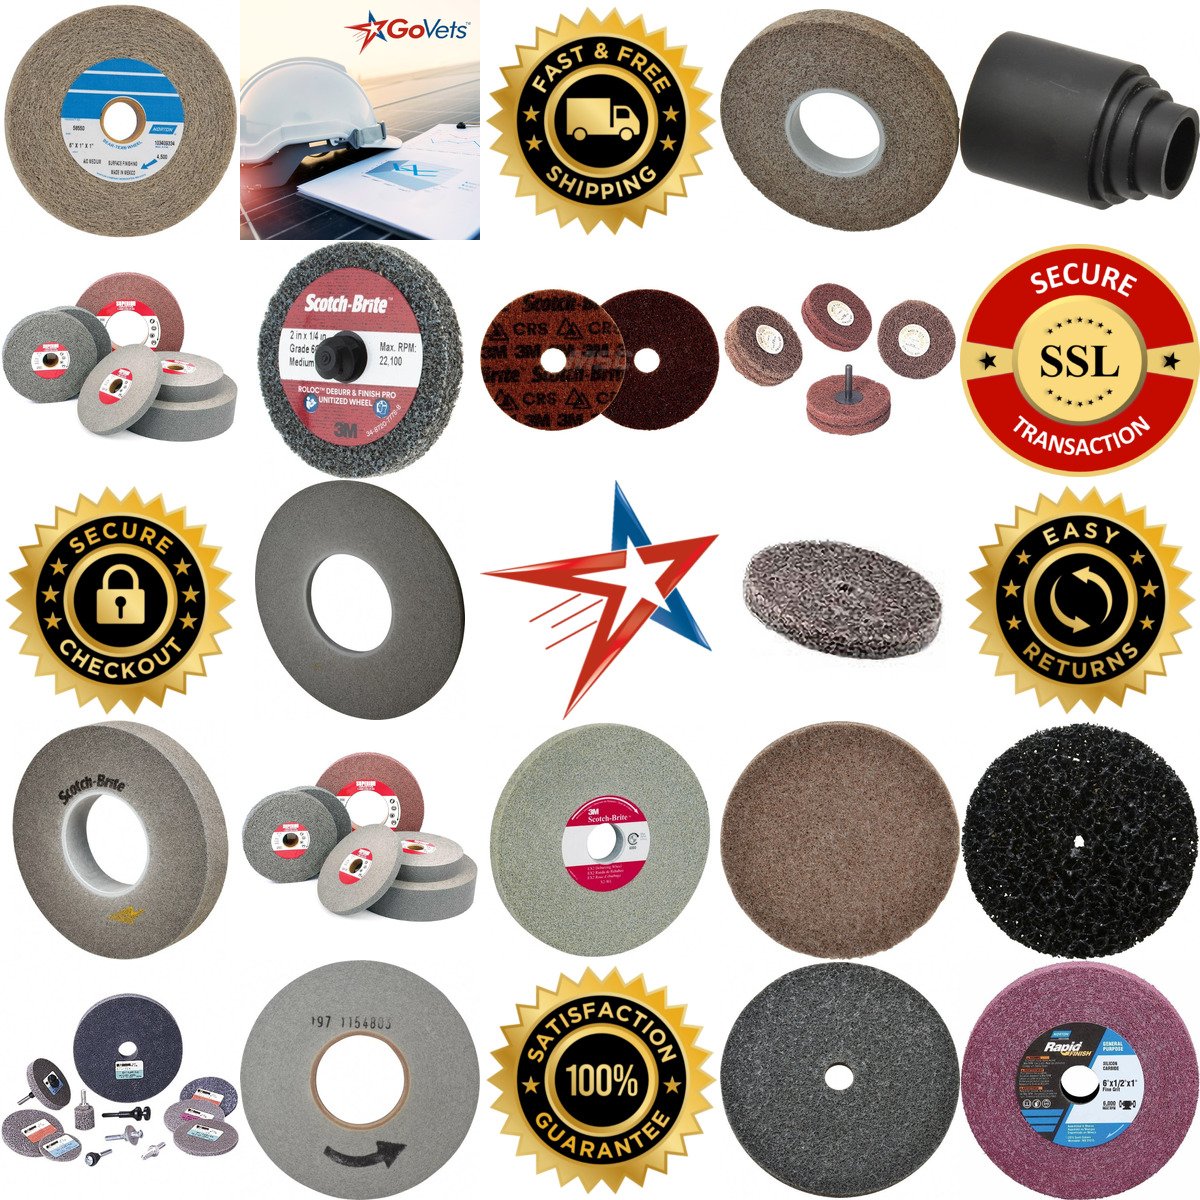 A selection of Deburring Wheels Discs products on GoVets